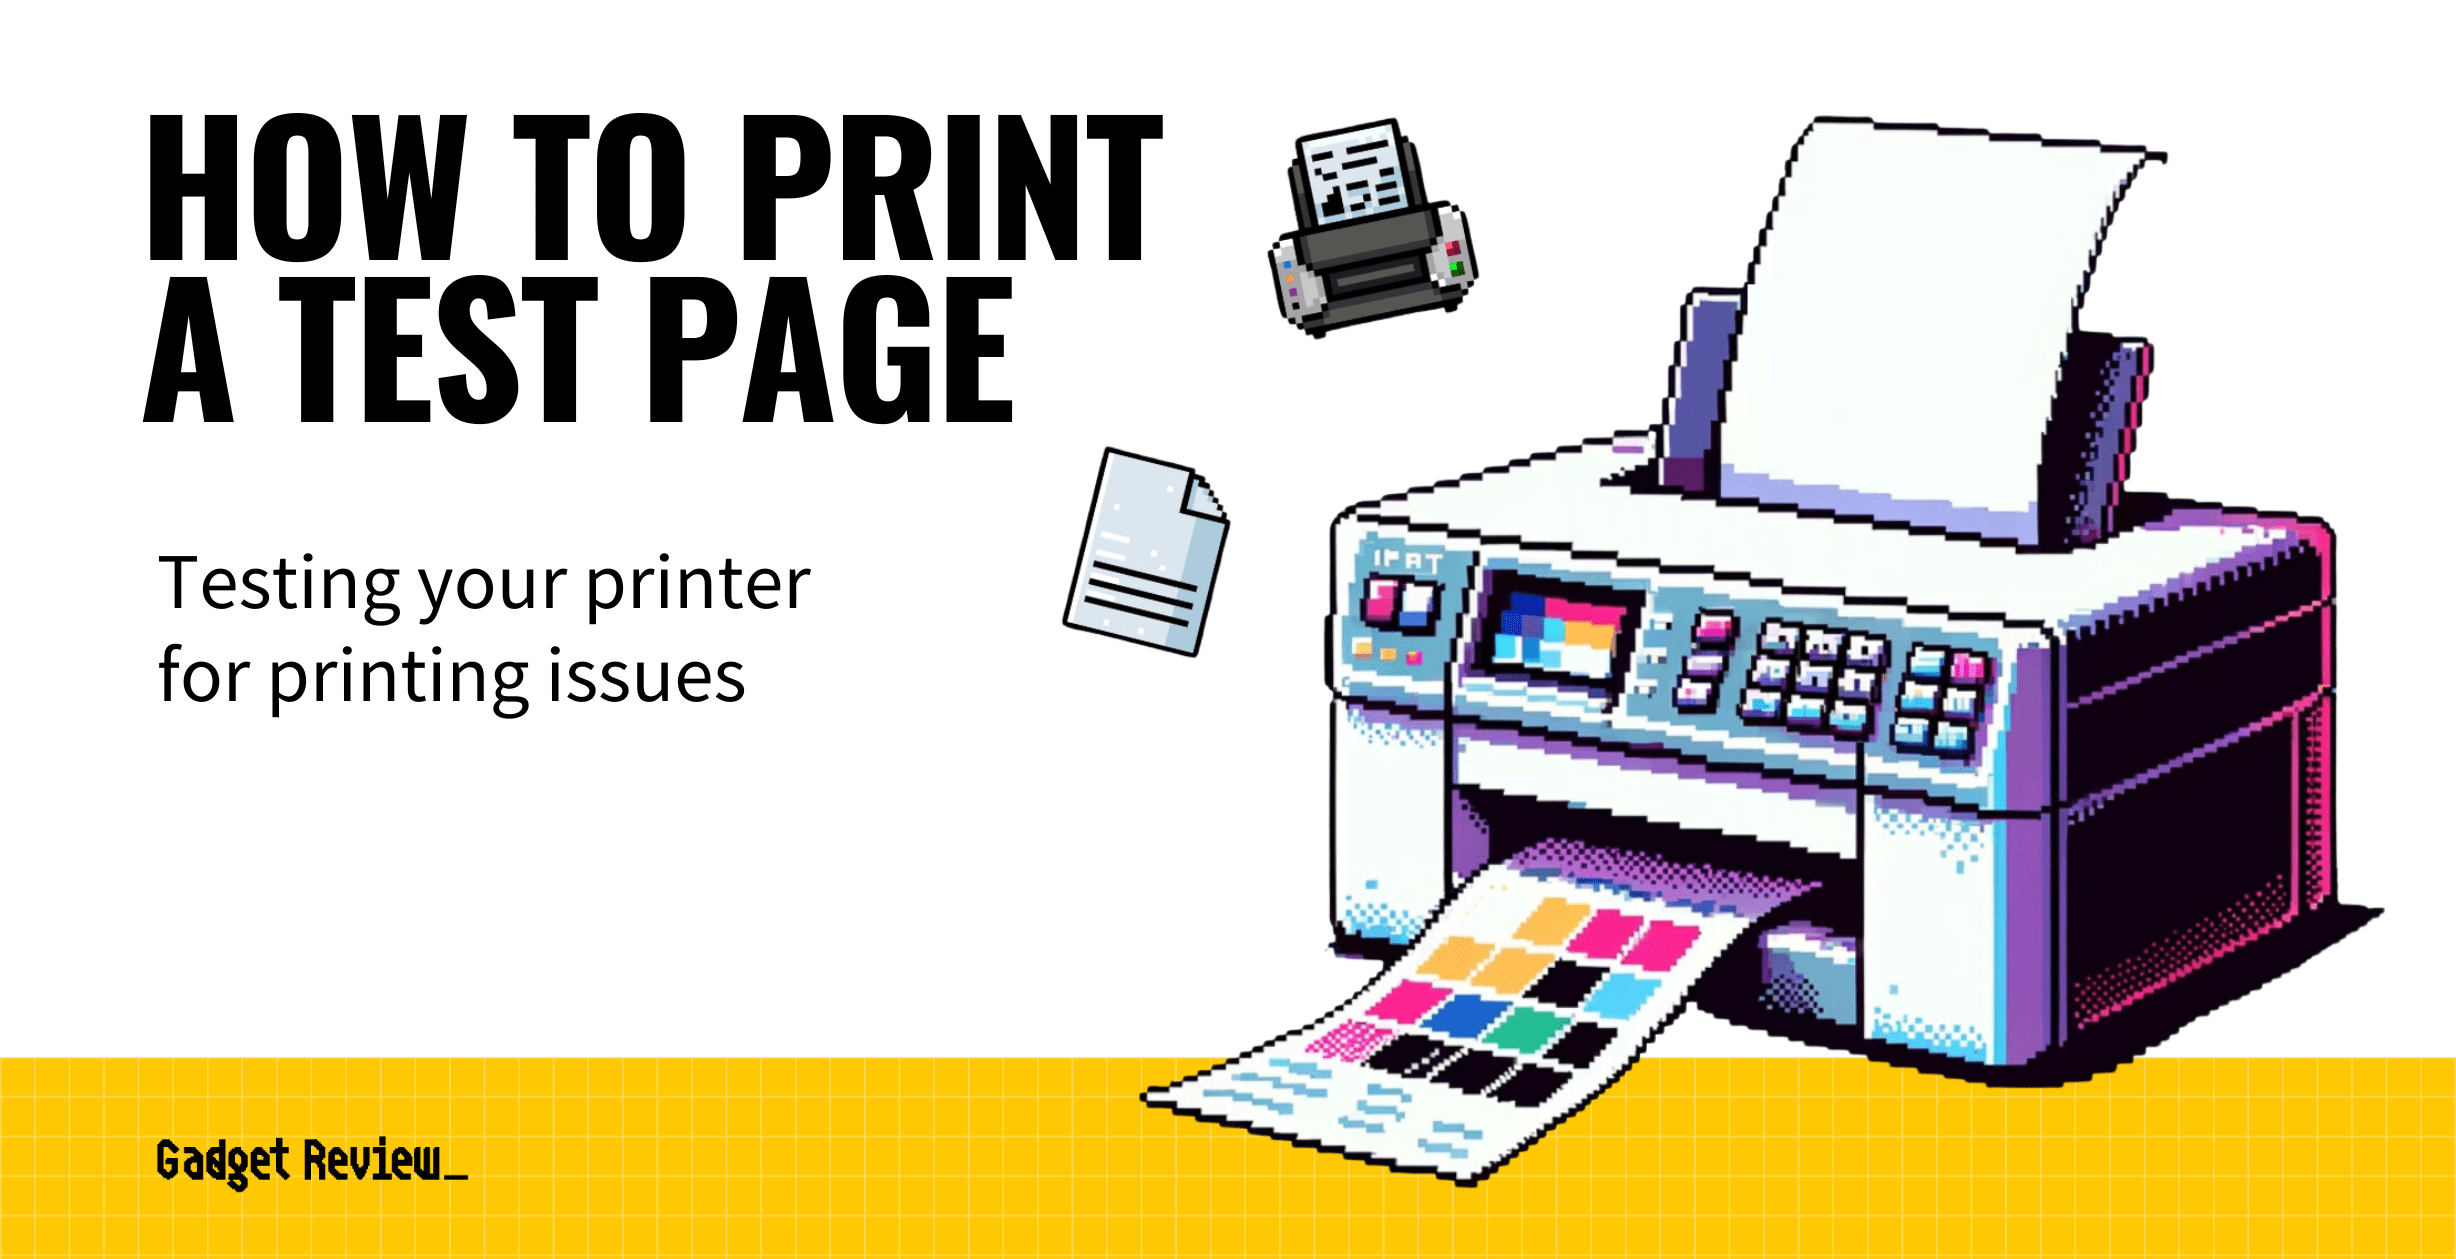 how to print a test page guide